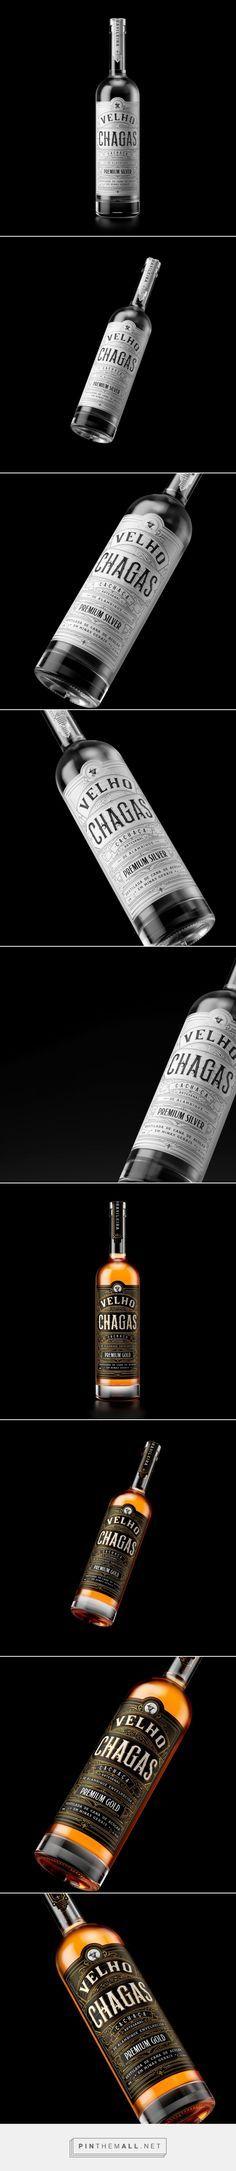 Alcoholic Drink Logo - Best Alcoholic Drink Packaging Design image. Alcohol